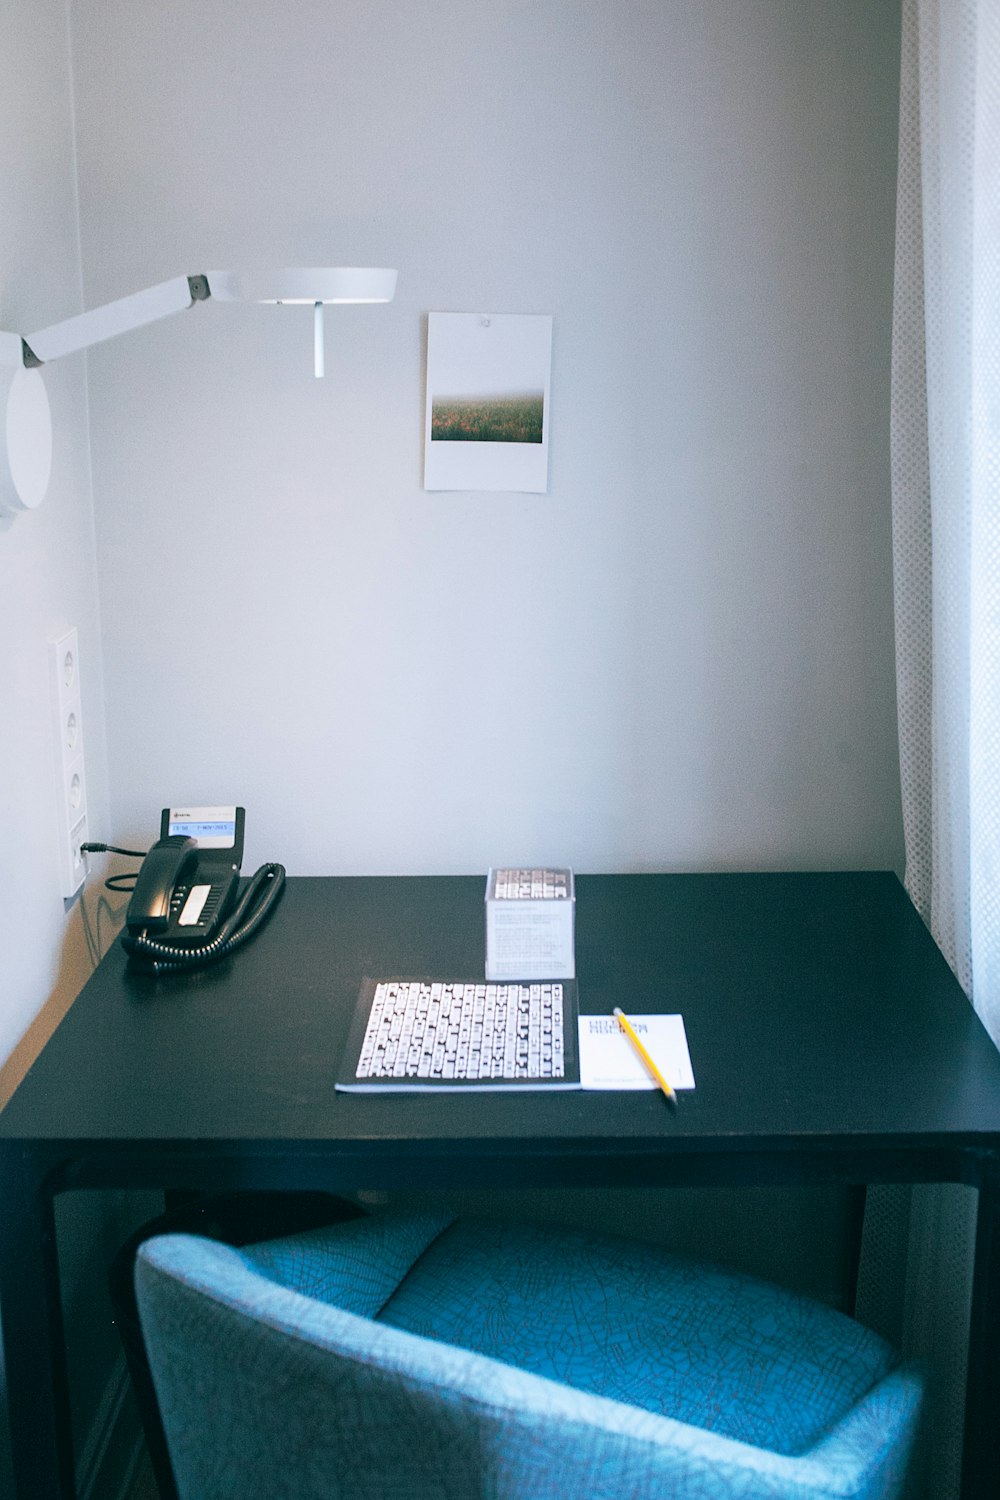 white and black book beside yellow pen and black telephone on rectangular black wooden table